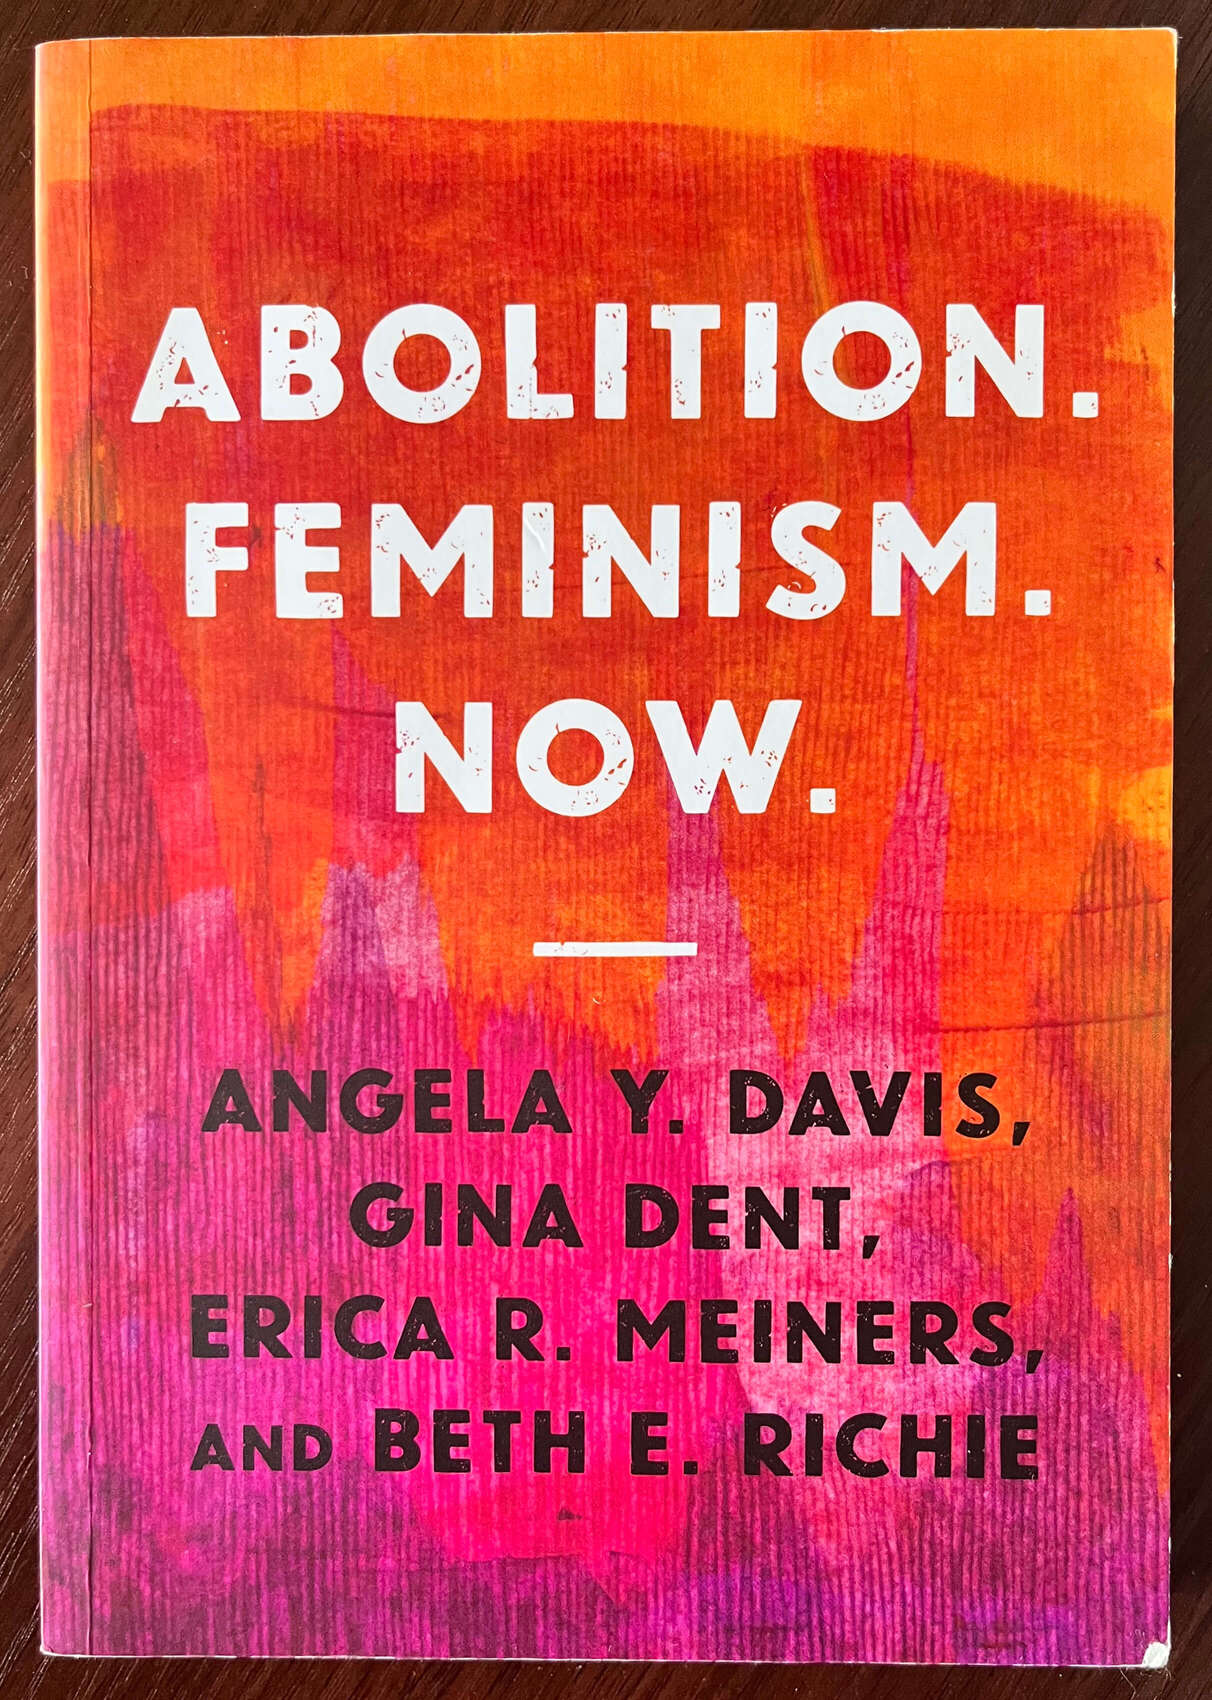 “Abolition. Feminism. Now.” by Angela Y. Davis, Gina Dent Erica R. Meiners and Beth E. Richie